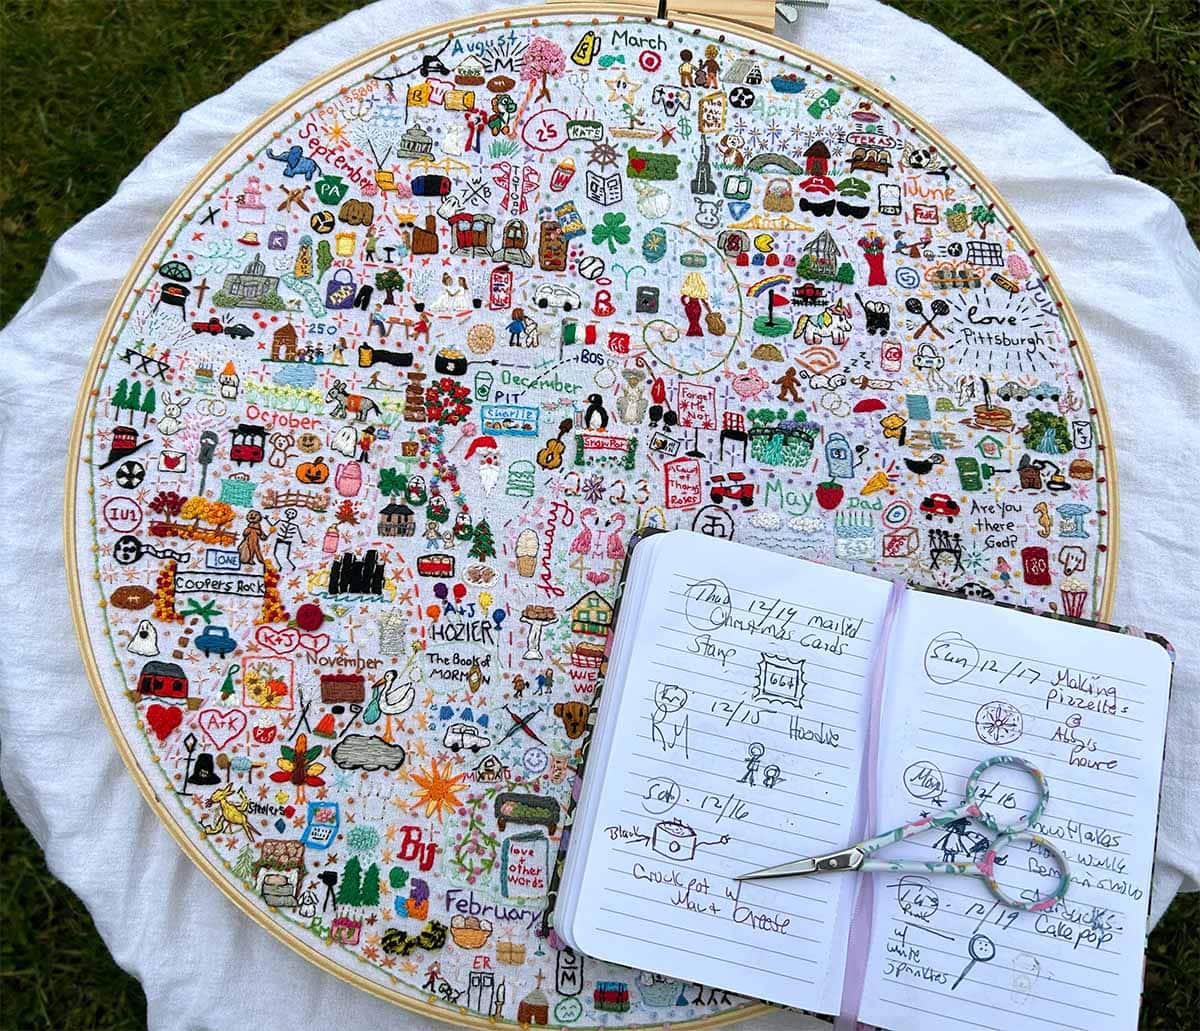 A 14"embroidery hoop is filled to the edge with embroidered icons. A design notebook is held open by embroidery scissors to a page with sketches for the hoop